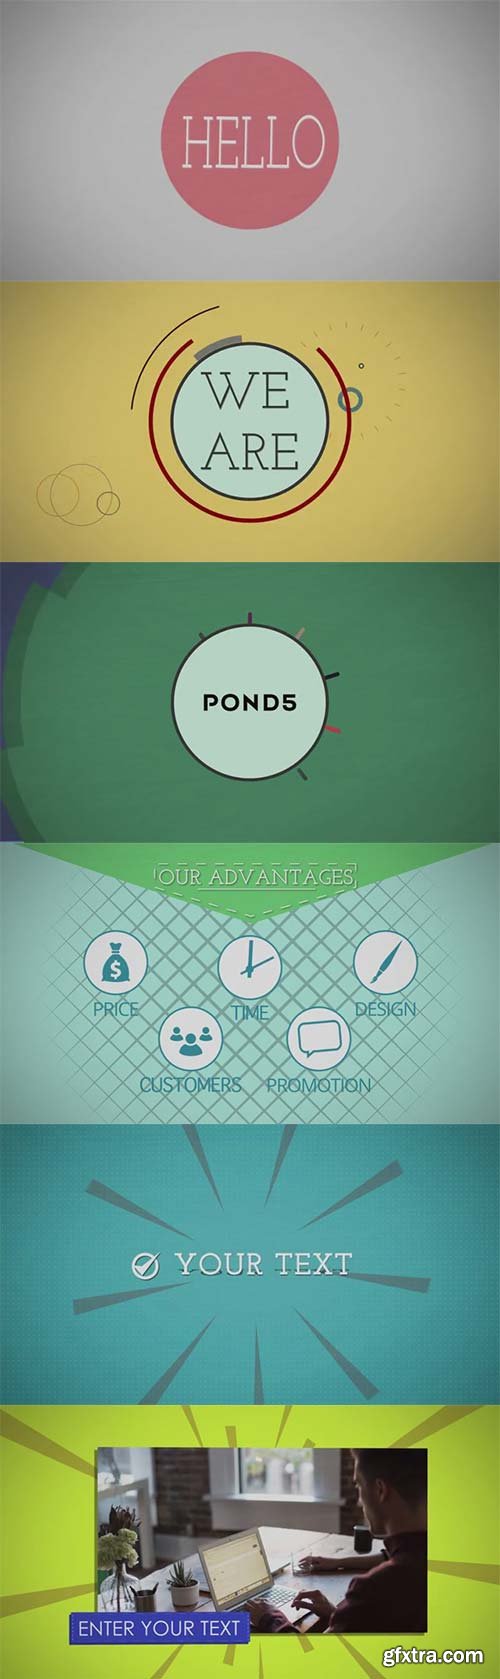 Pond5 - Promote Your Product - 068952093